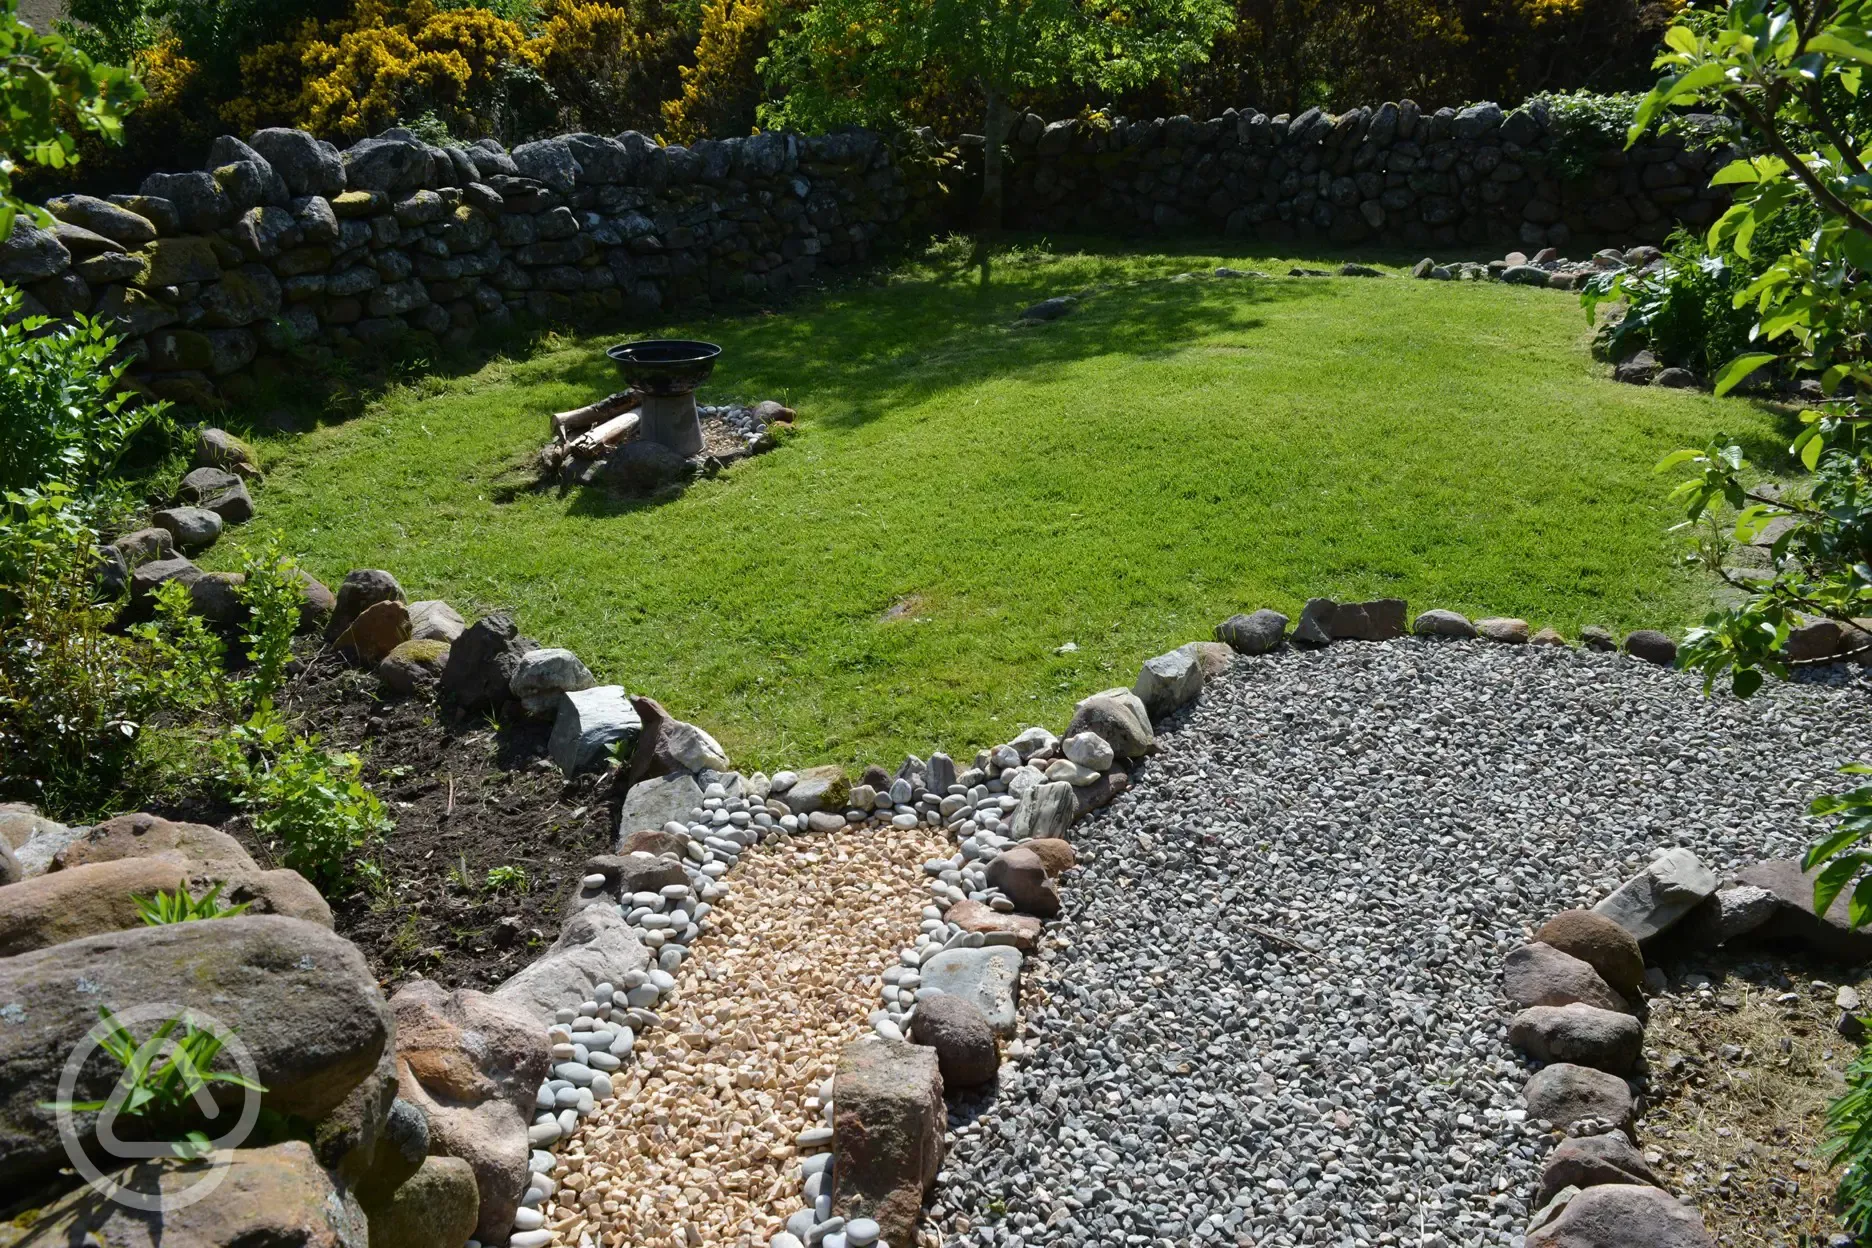 Bothy garden and fire pit